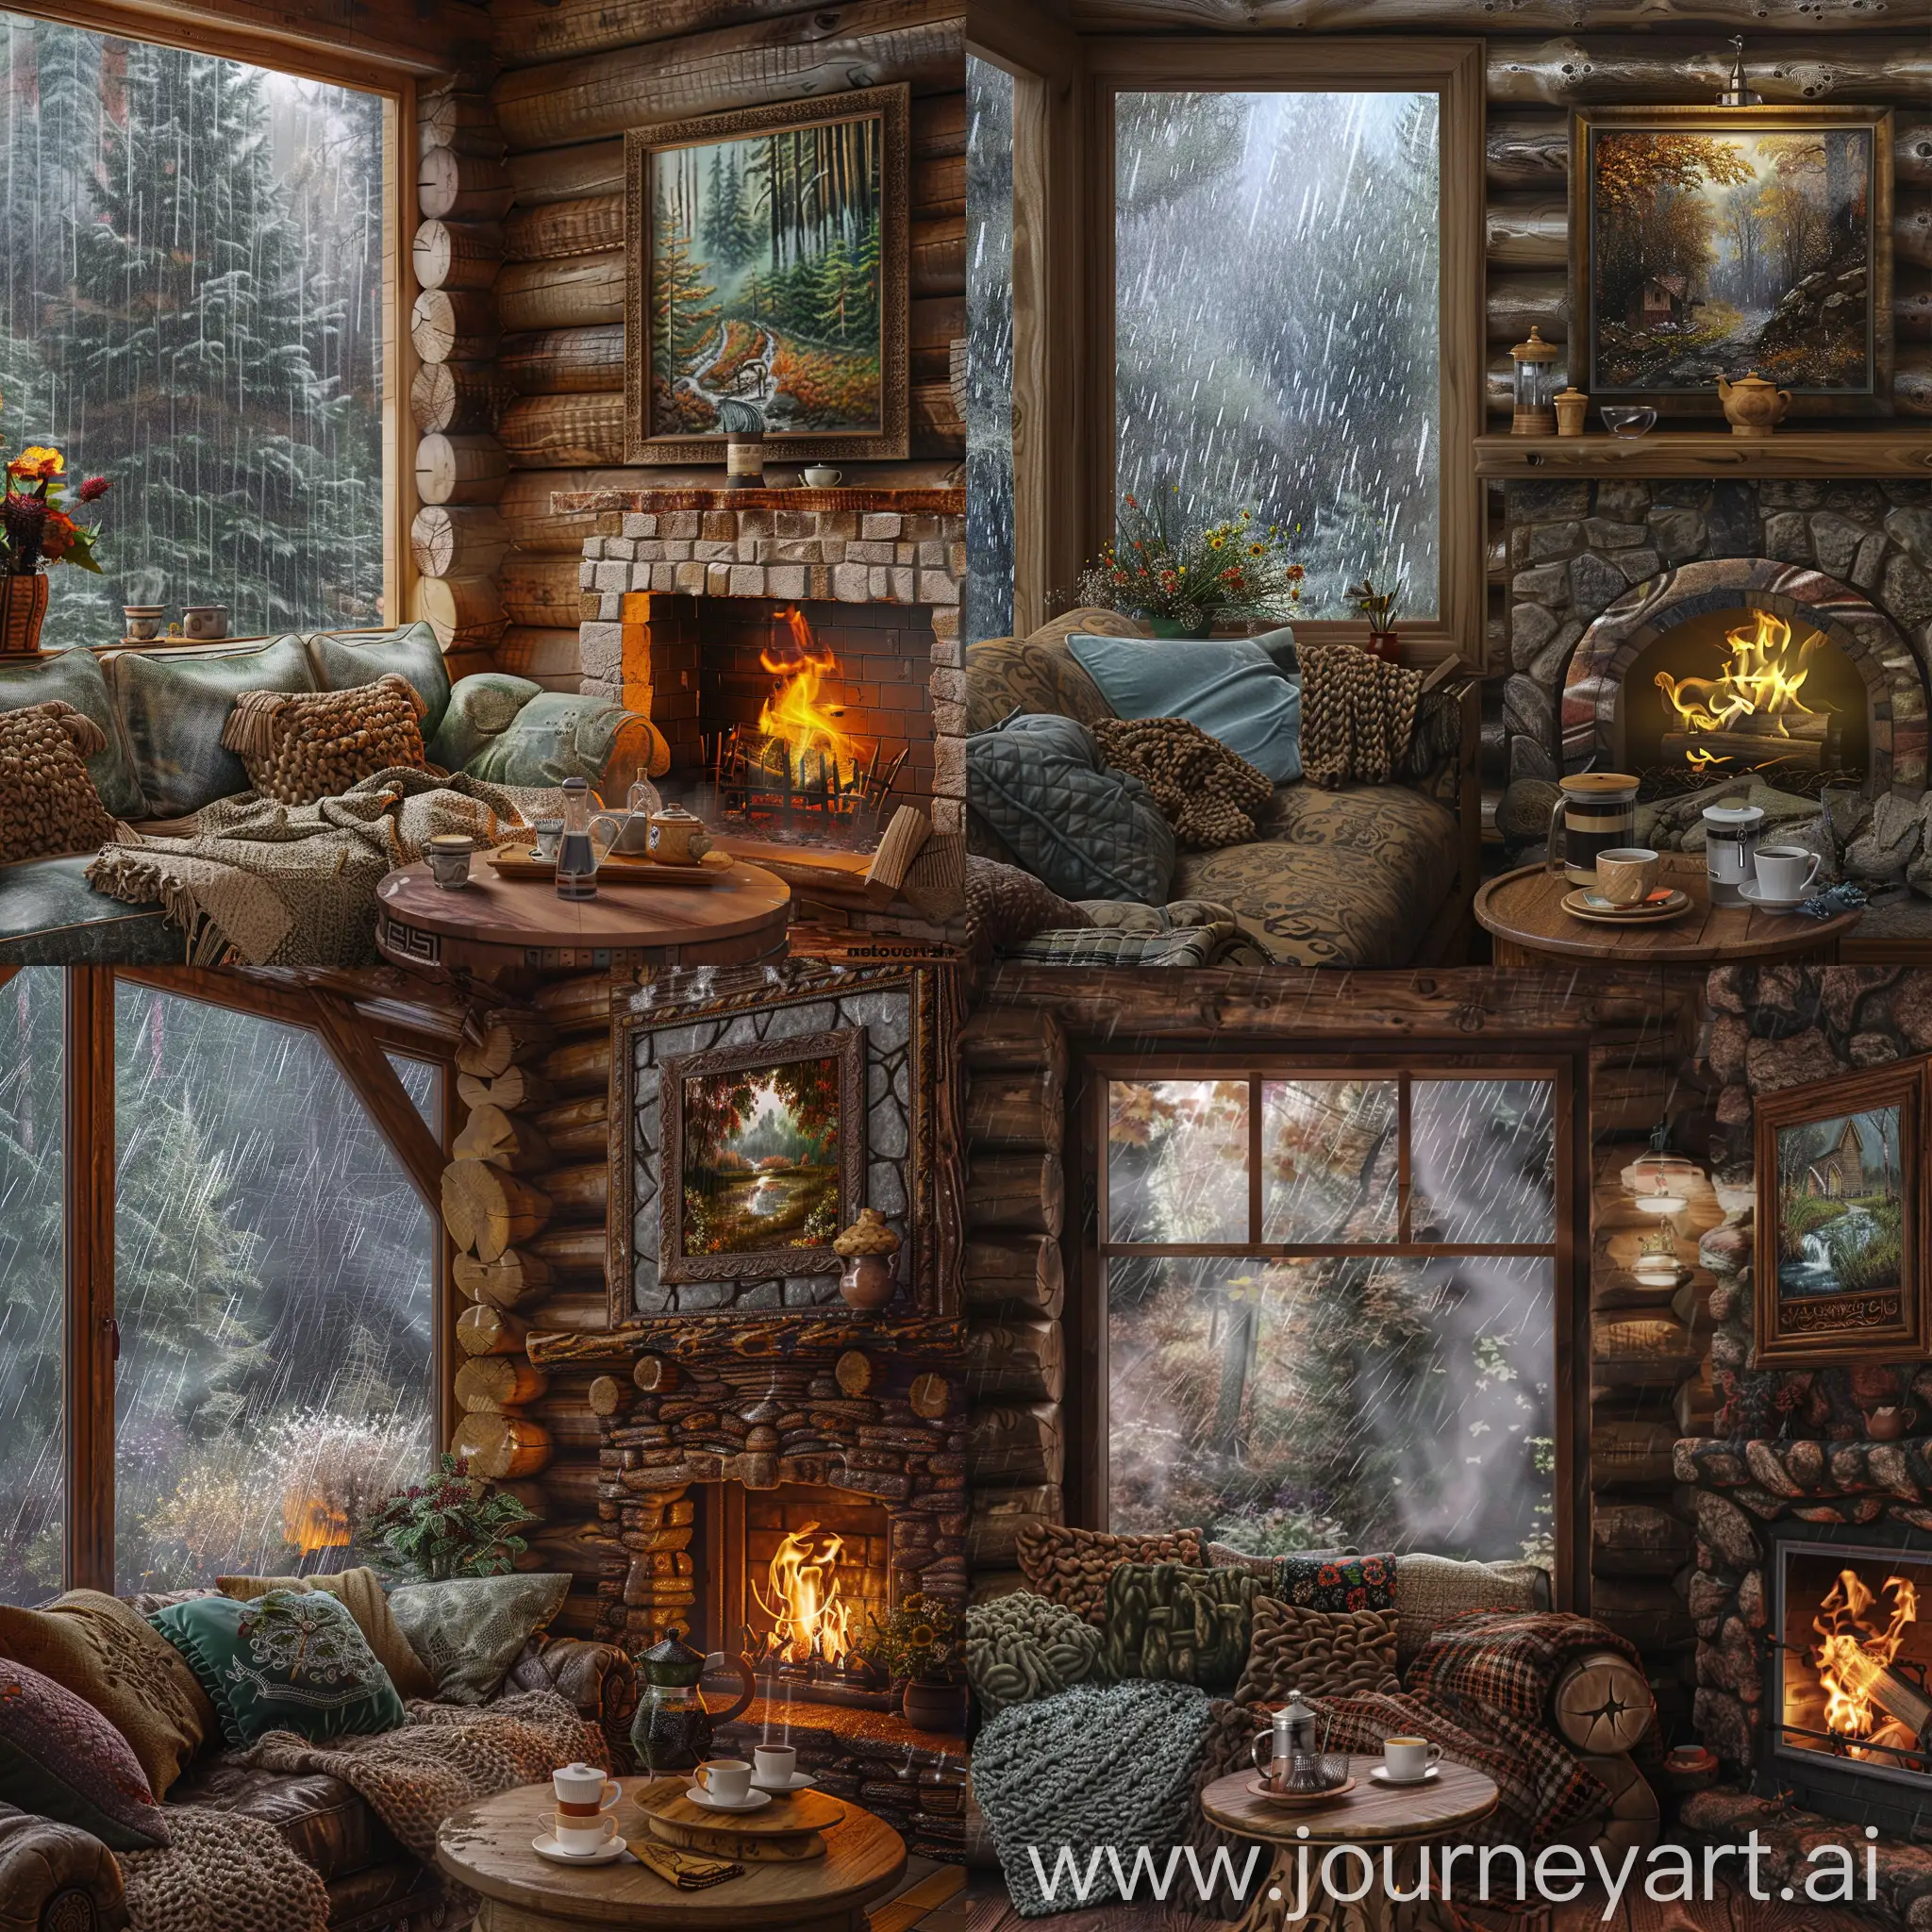 A highly aesthetic and textured log cabin interior in vertical orientation with a rainy atmosphere outside. Inside, the fireplace on the right should have an elegantly carved stone texture, with a bright and cozy fire. Above the fireplace, a beautiful, intricate rustic painting is prominently displayed. The walls are made of richly textured horizontal logs with deep wood grains, adding to the aesthetic feel. The window on the left now has gentle raindrops streaking down the pane, with a view of a dense, misty forest in a downpour. In front of the window, there's an artistically crafted round wooden table with a French press, two designer cups, and an ornate small teapot. The couch features luxuriously plush pillows and a thick, hand-knitted throw blanket in earth tones. A stylish wooden side table holds an arrangement of lush wildflowers in a decorative vase. Soft, warm lighting enhances the room's textures and complements the romantic rainy view, creating a picture-perfect cozy atmosphere.